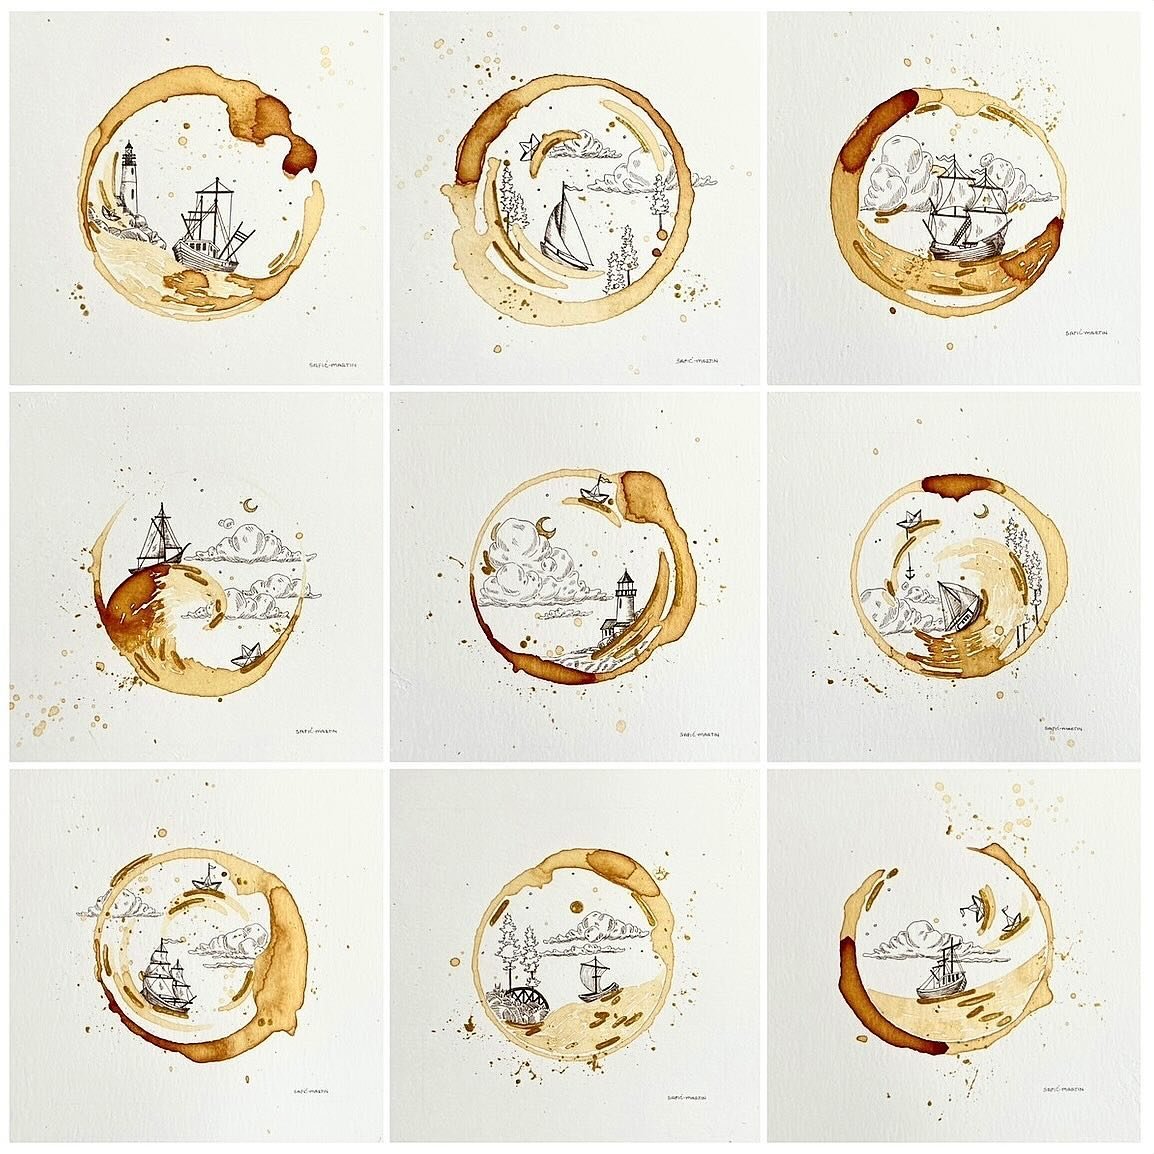 Tea Rings &amp; Daydreams.
Nine dreamy little pieces each measuring 6x6in created with tea and pen work.

Pleased to say that this piece won 3rd place in the Art of Tea Exhibit at Del Ray Artisans Gallery.

#tiarasaficmartinart #teaart #tearing #arto